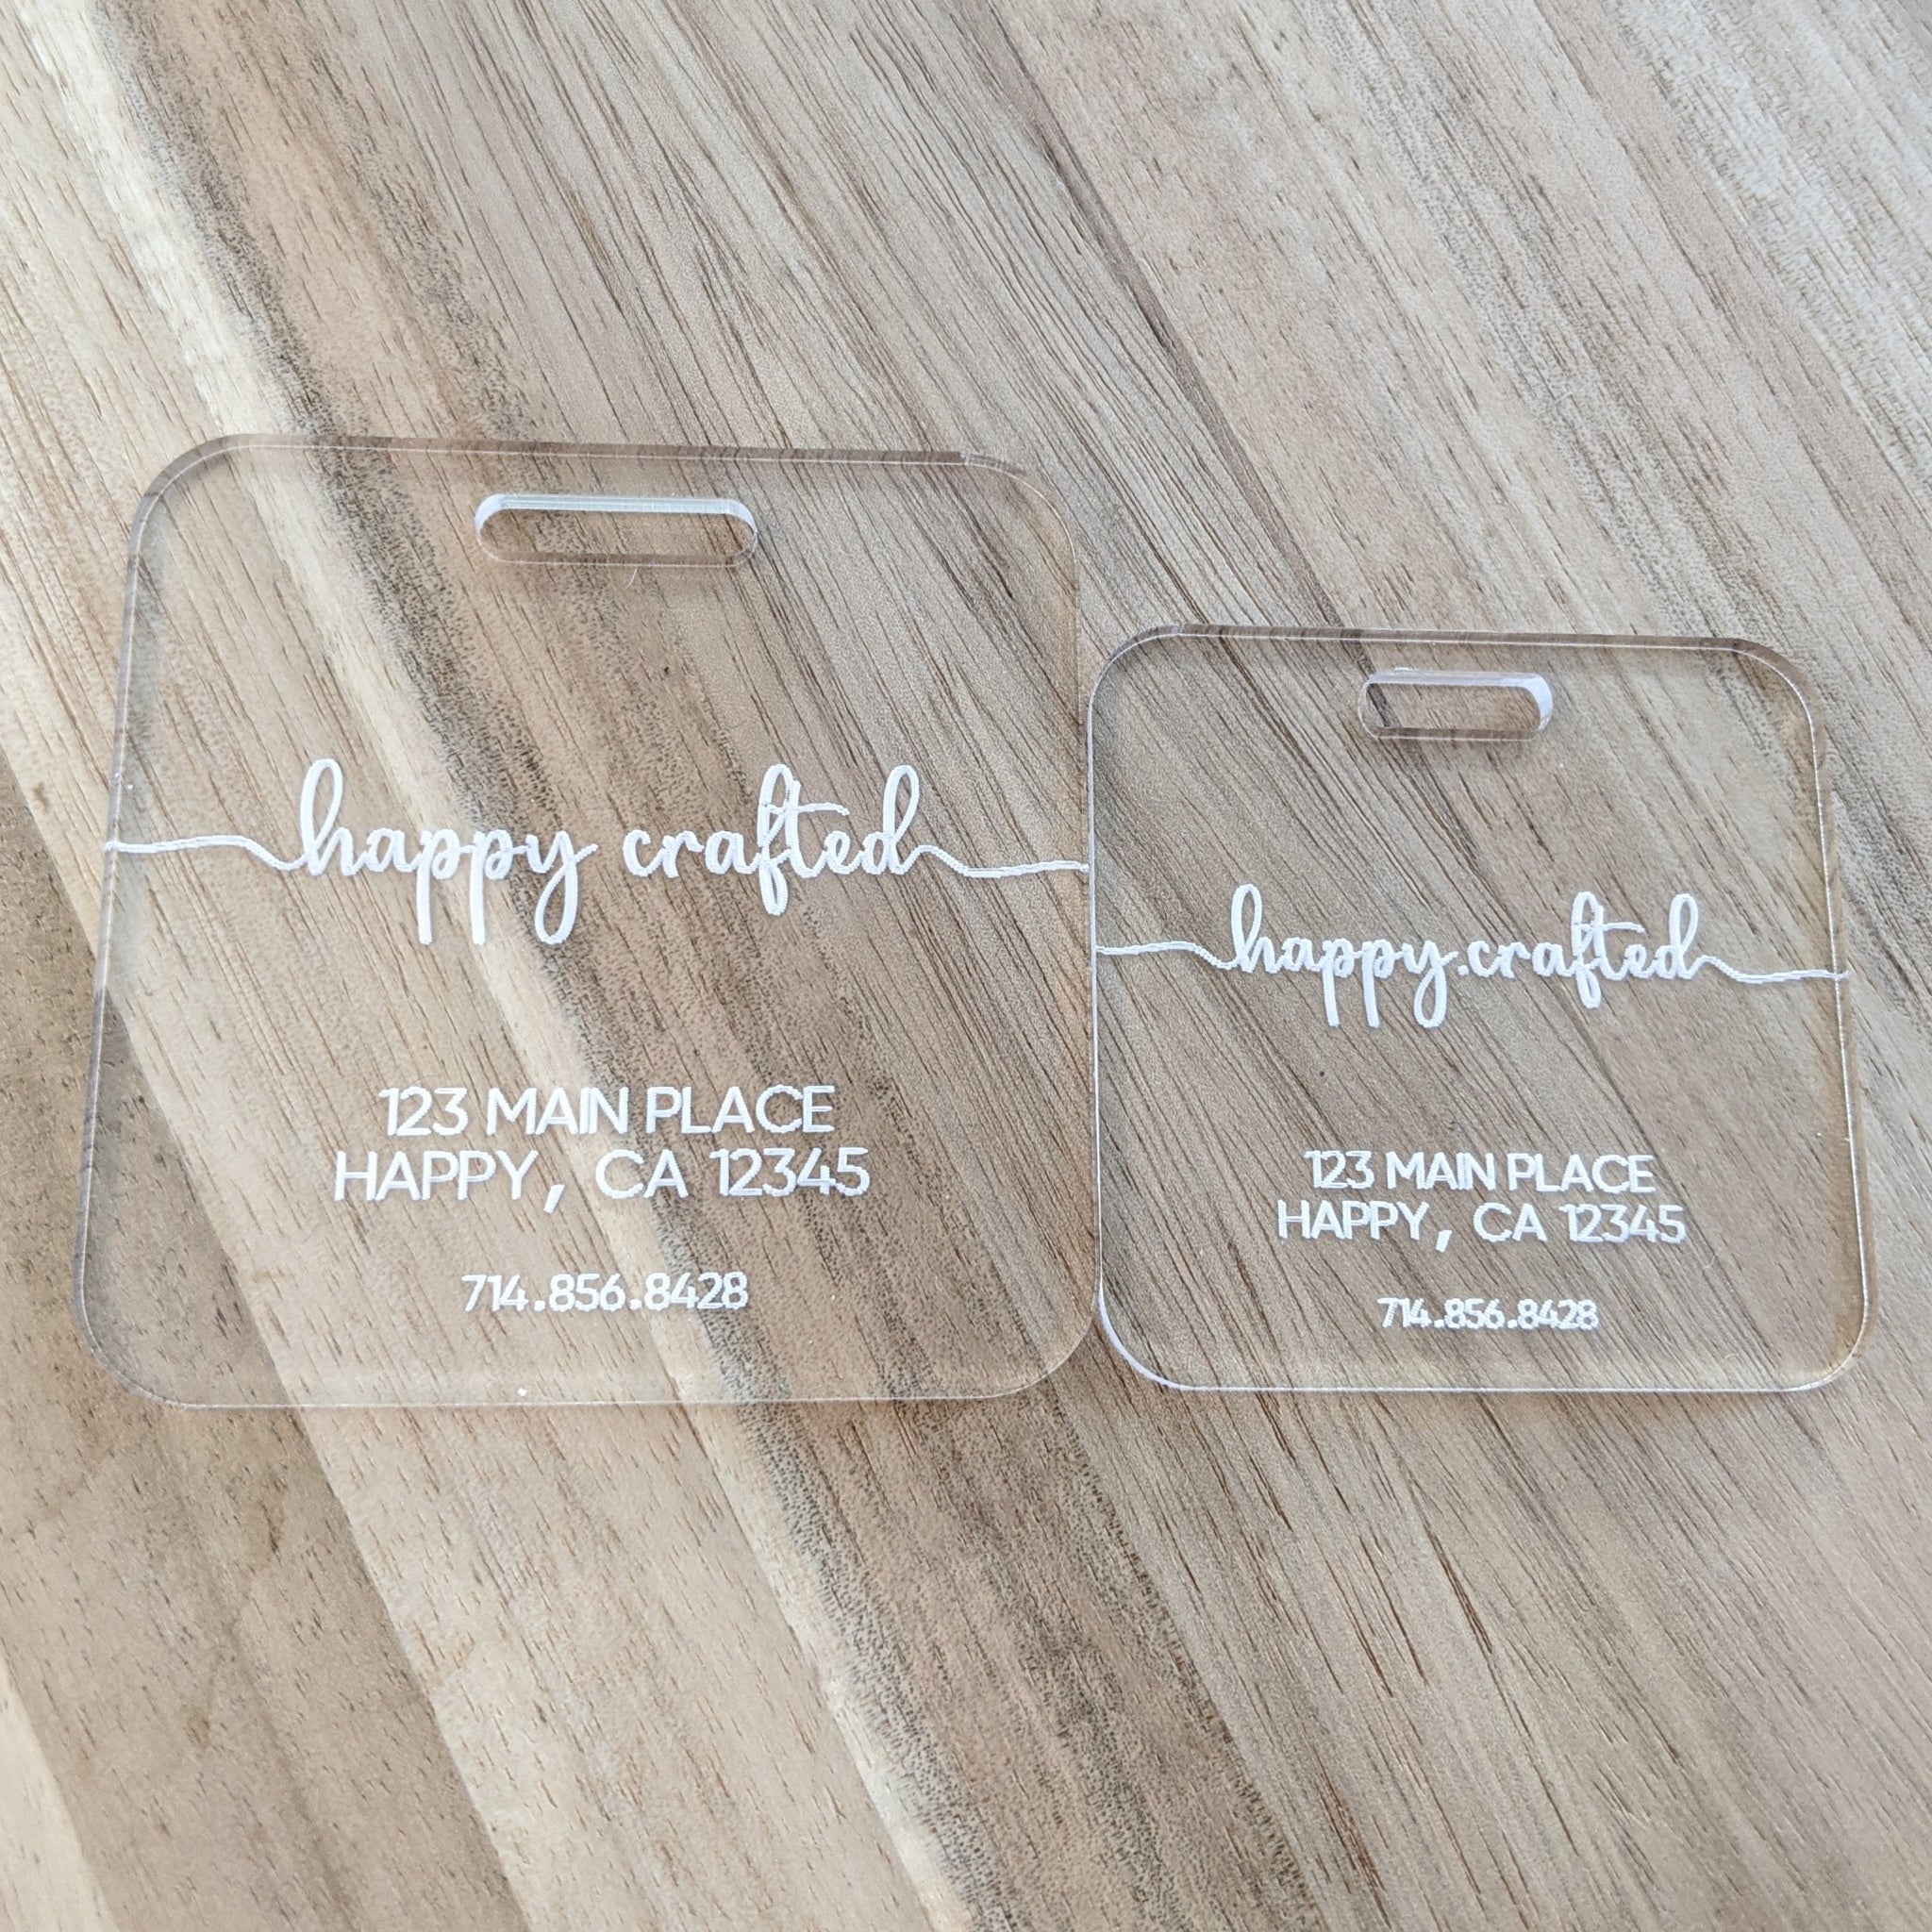 Square Clear Acrylic Luggage Tag – happycrafted